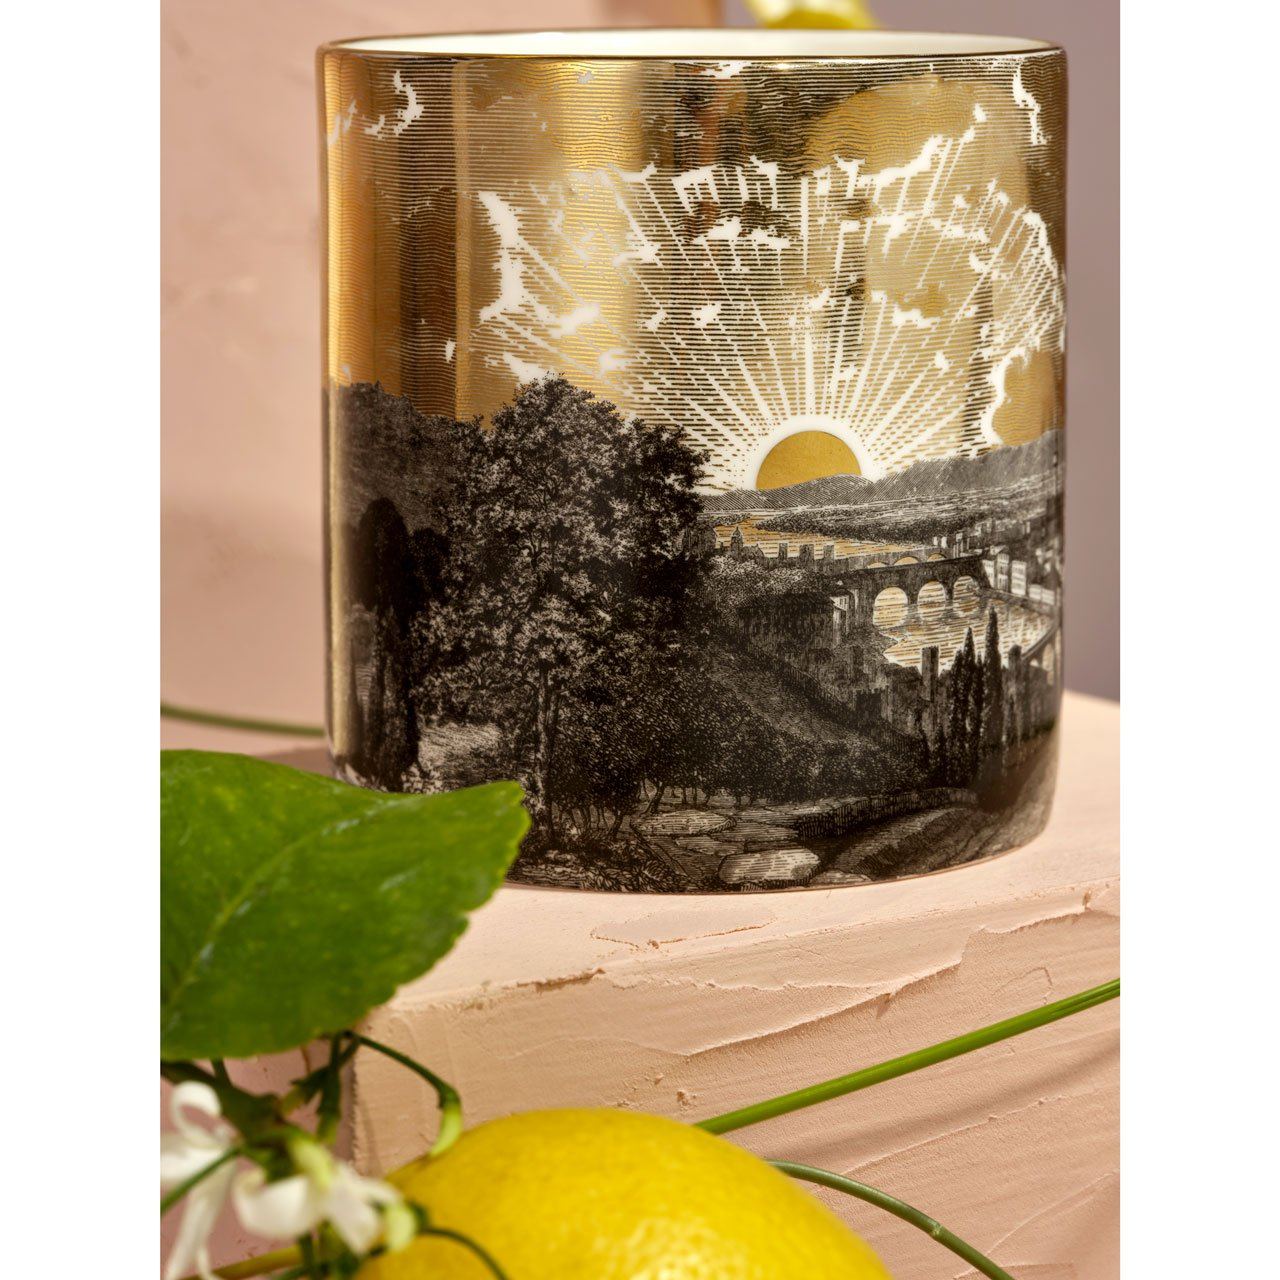 The Tuscan Sunset Ceramic Candle